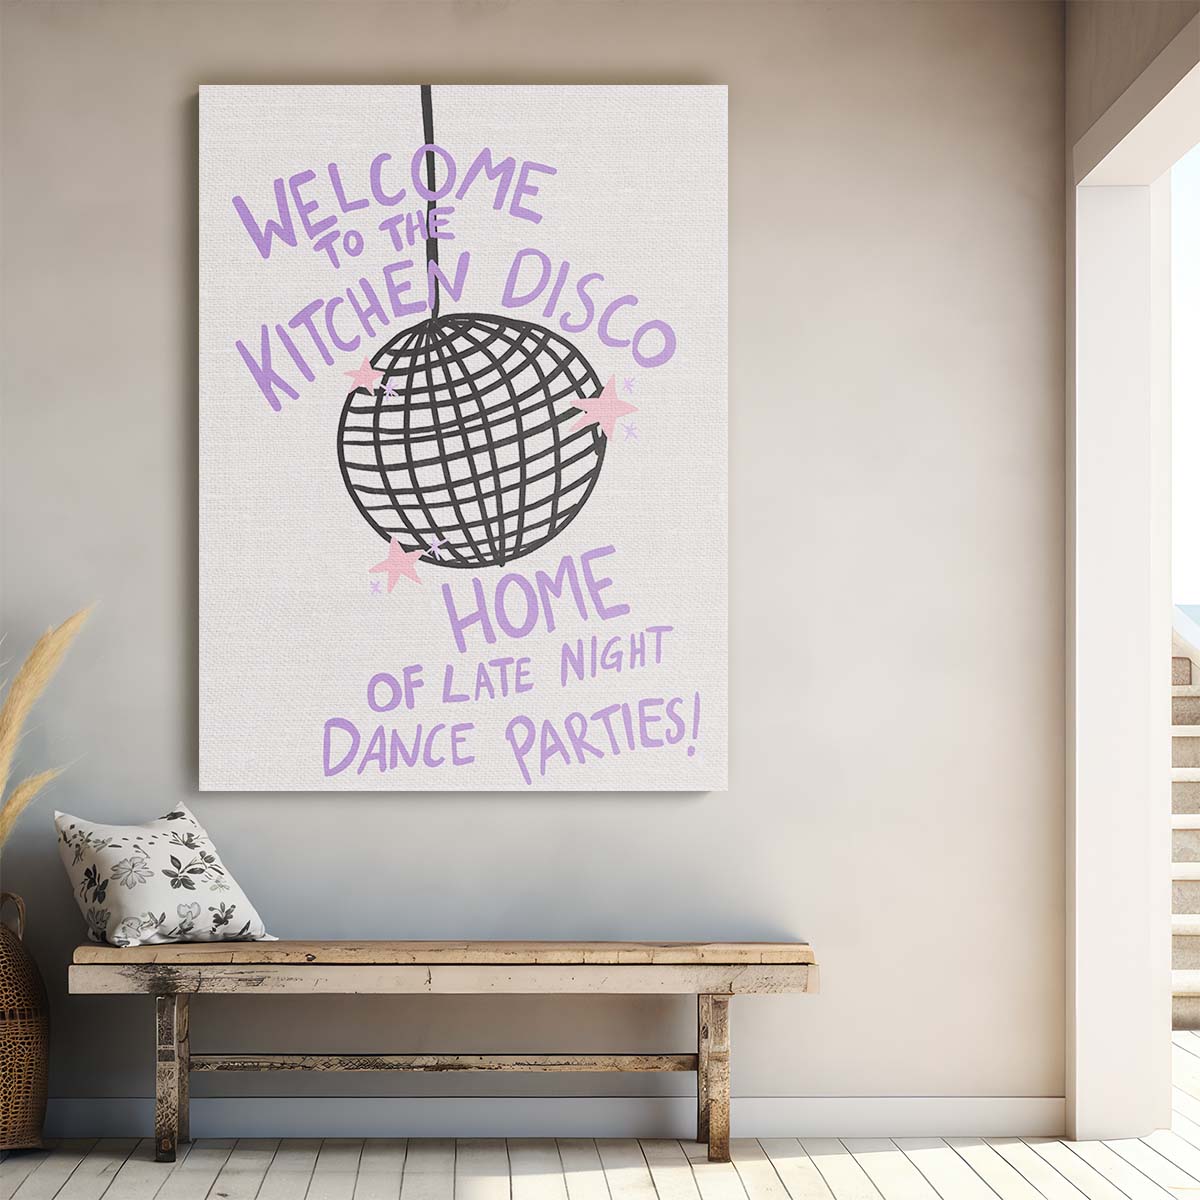 Inspirational Kitchen Disco Typography Illustration - Motivational Quote Art by Luxuriance Designs, made in USA